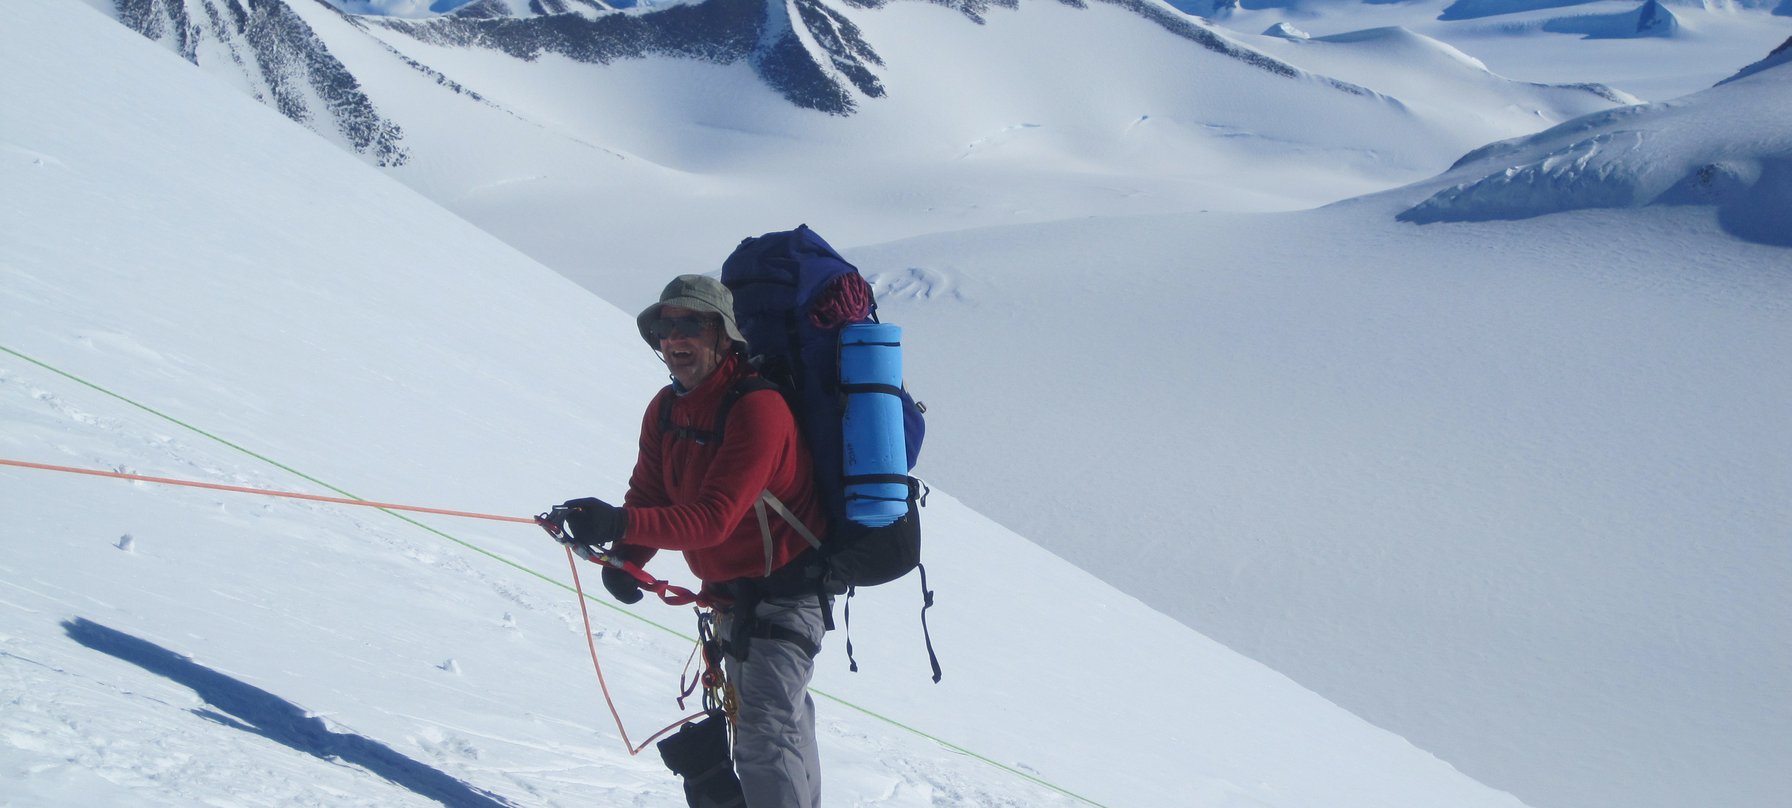 A photo of John Carswell, dressed in cold weather hiking gear, holding onto a rope as he ascends a snowy mountain range. Image courtesy of John Carswell.